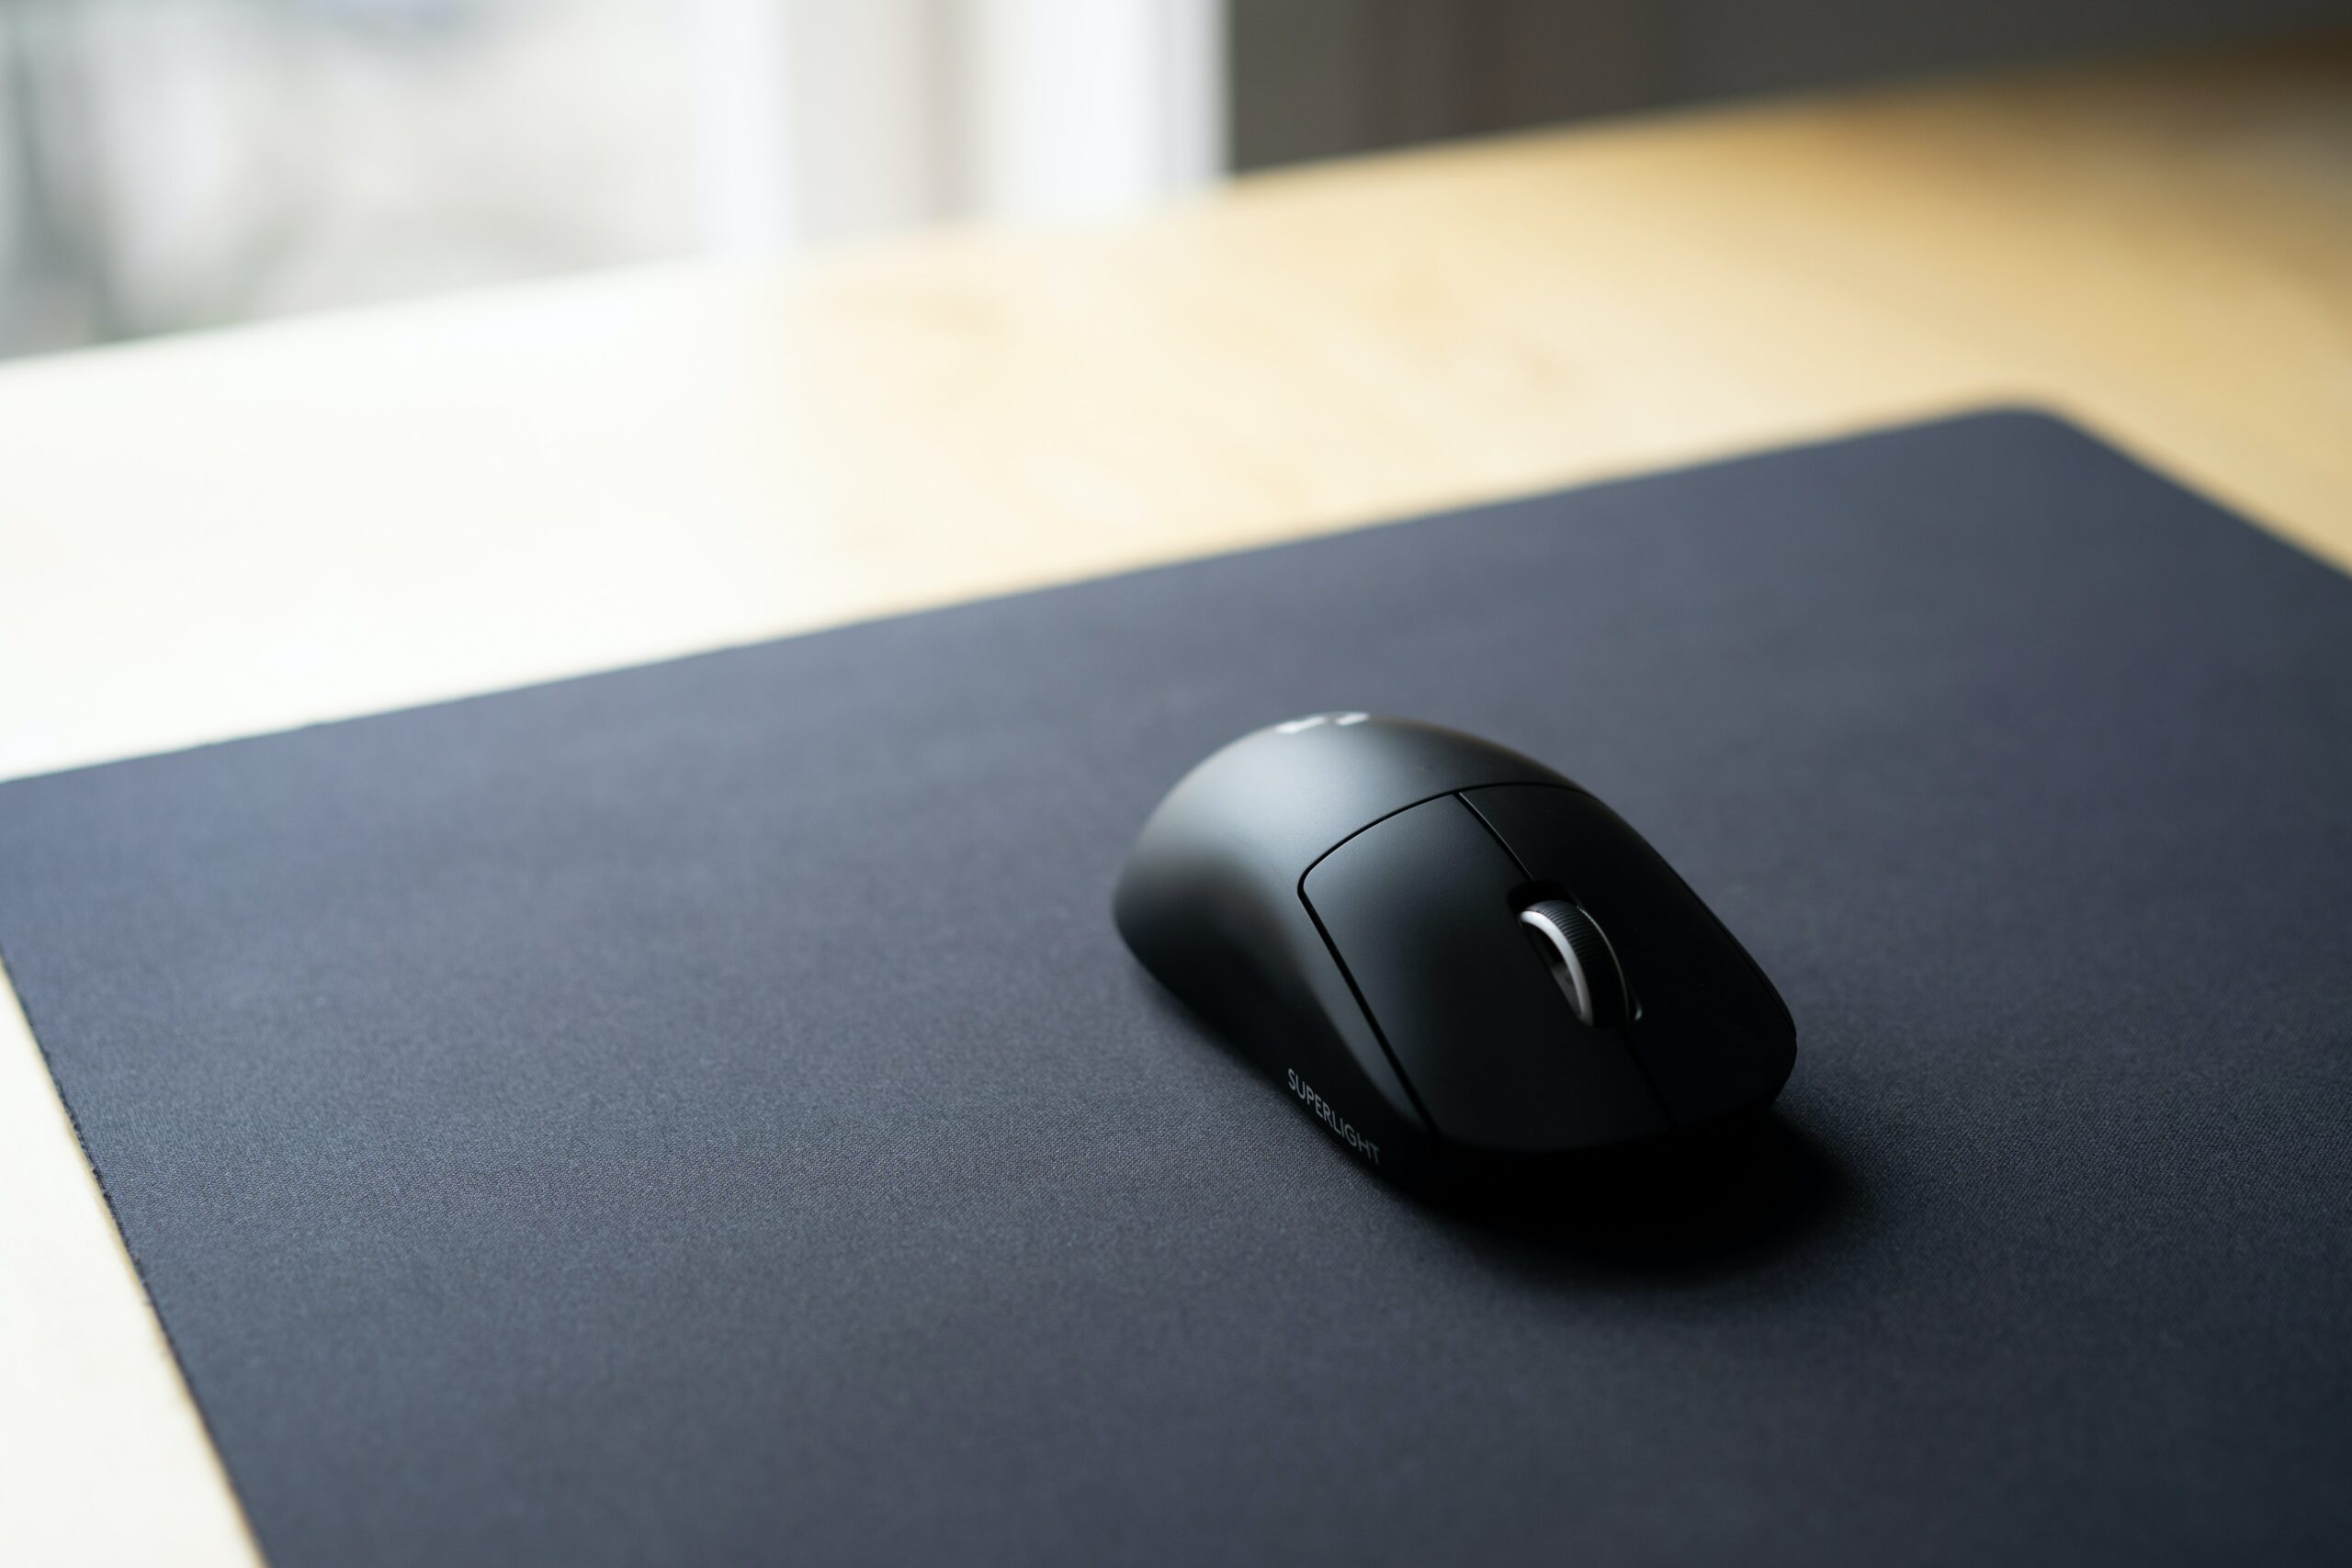 Why choose custom mouse pads?